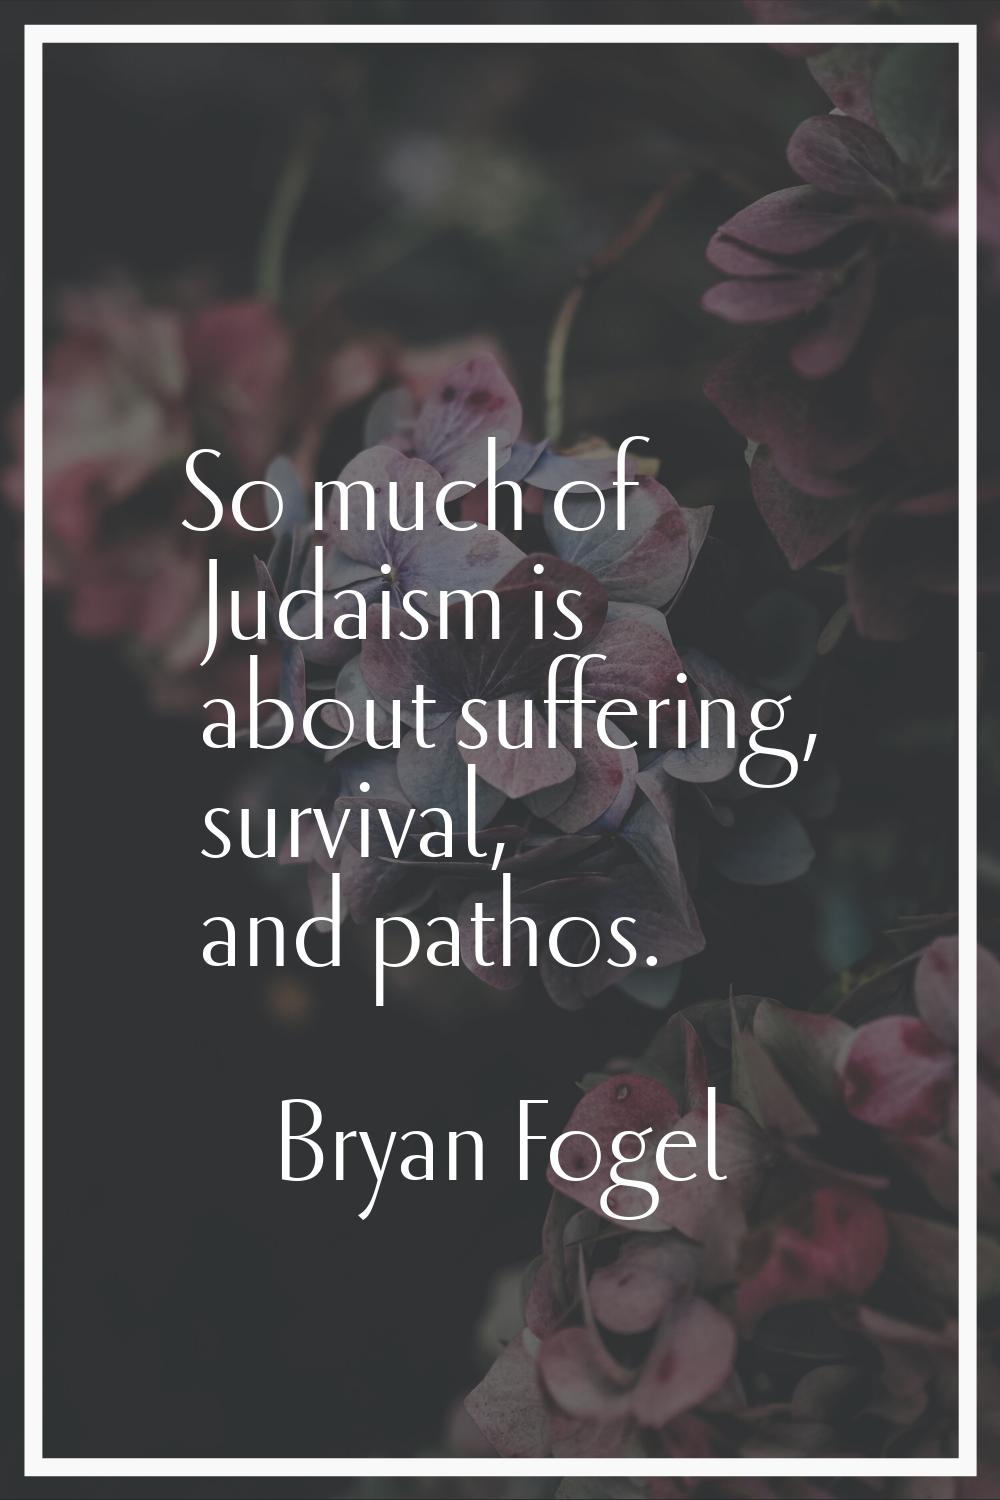 So much of Judaism is about suffering, survival, and pathos.